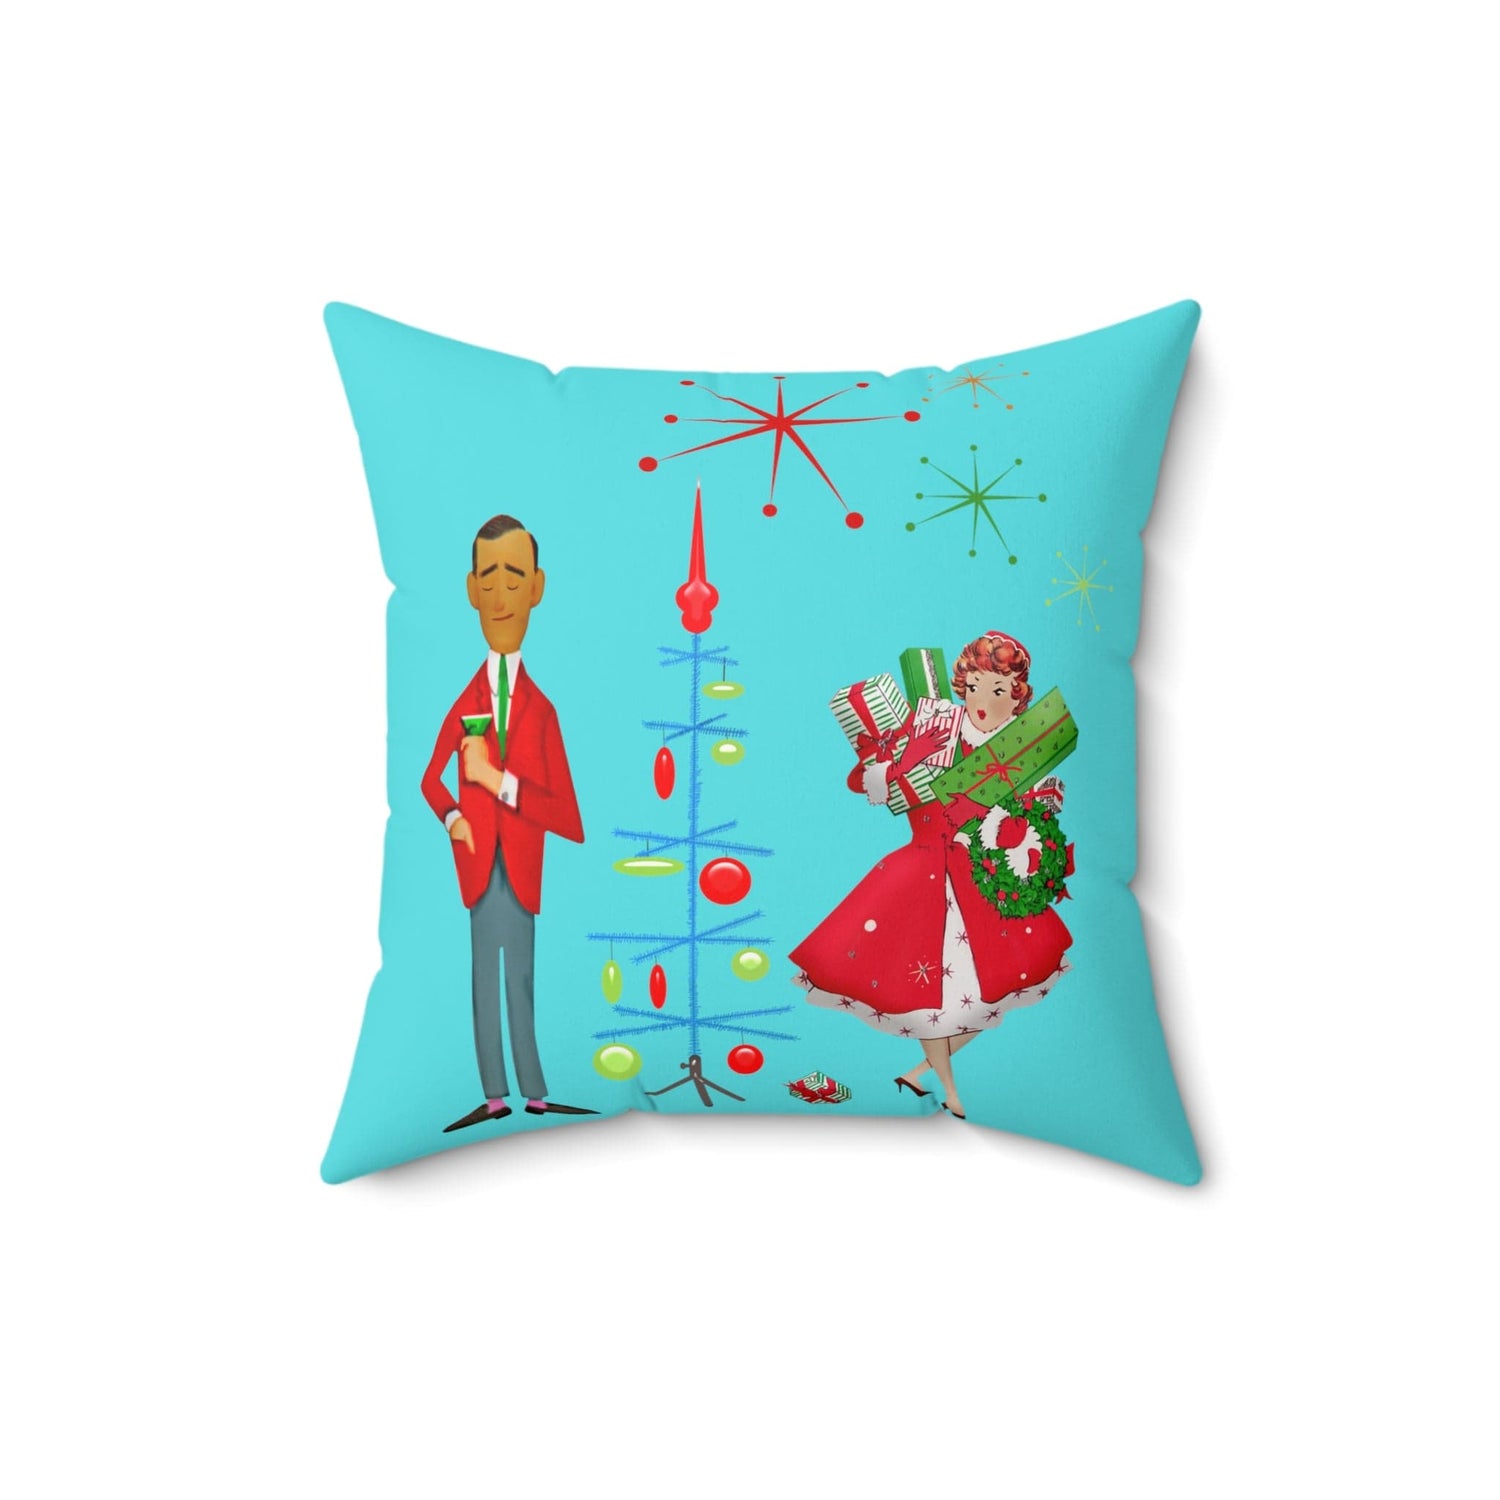 Mid Century Christmas, His And Her, Kitschy Cute, Vintage Mod Aqua Blue, Red, Candy Cane Pillow And Insert Home Decor